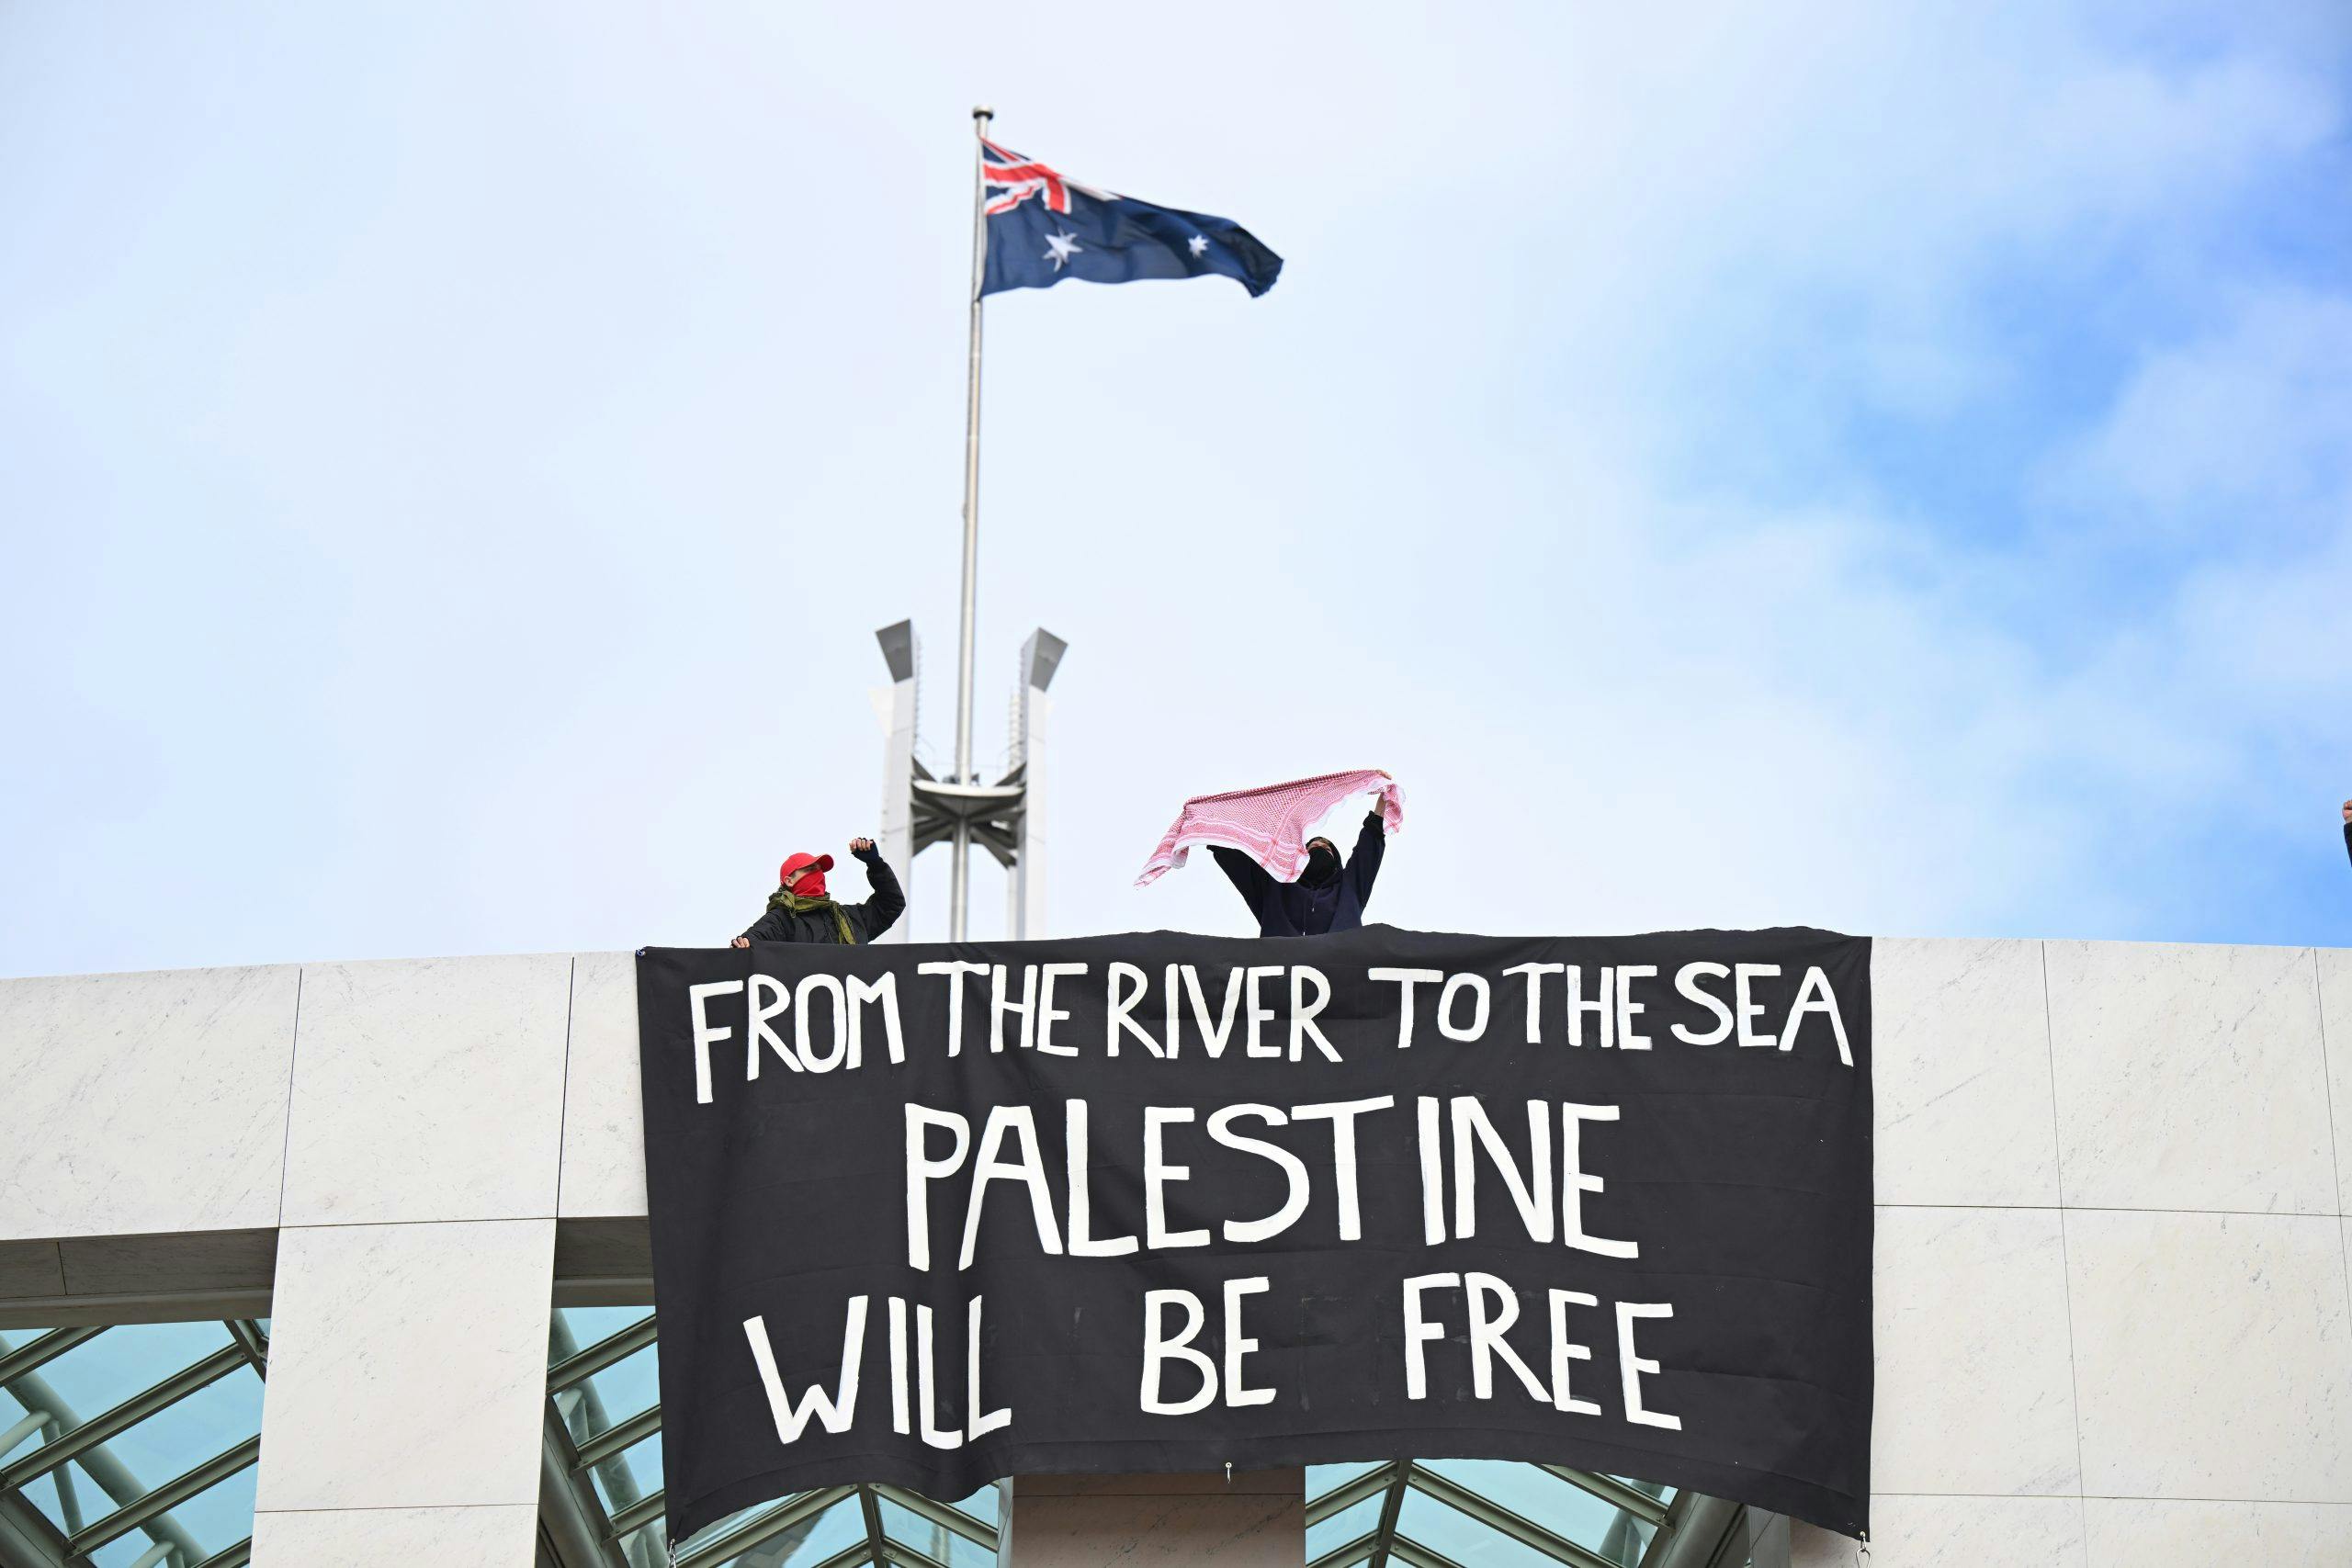 Australian flag and poster reading 'From the river to the sea Palestine will be free' displayed by people on a high wall.